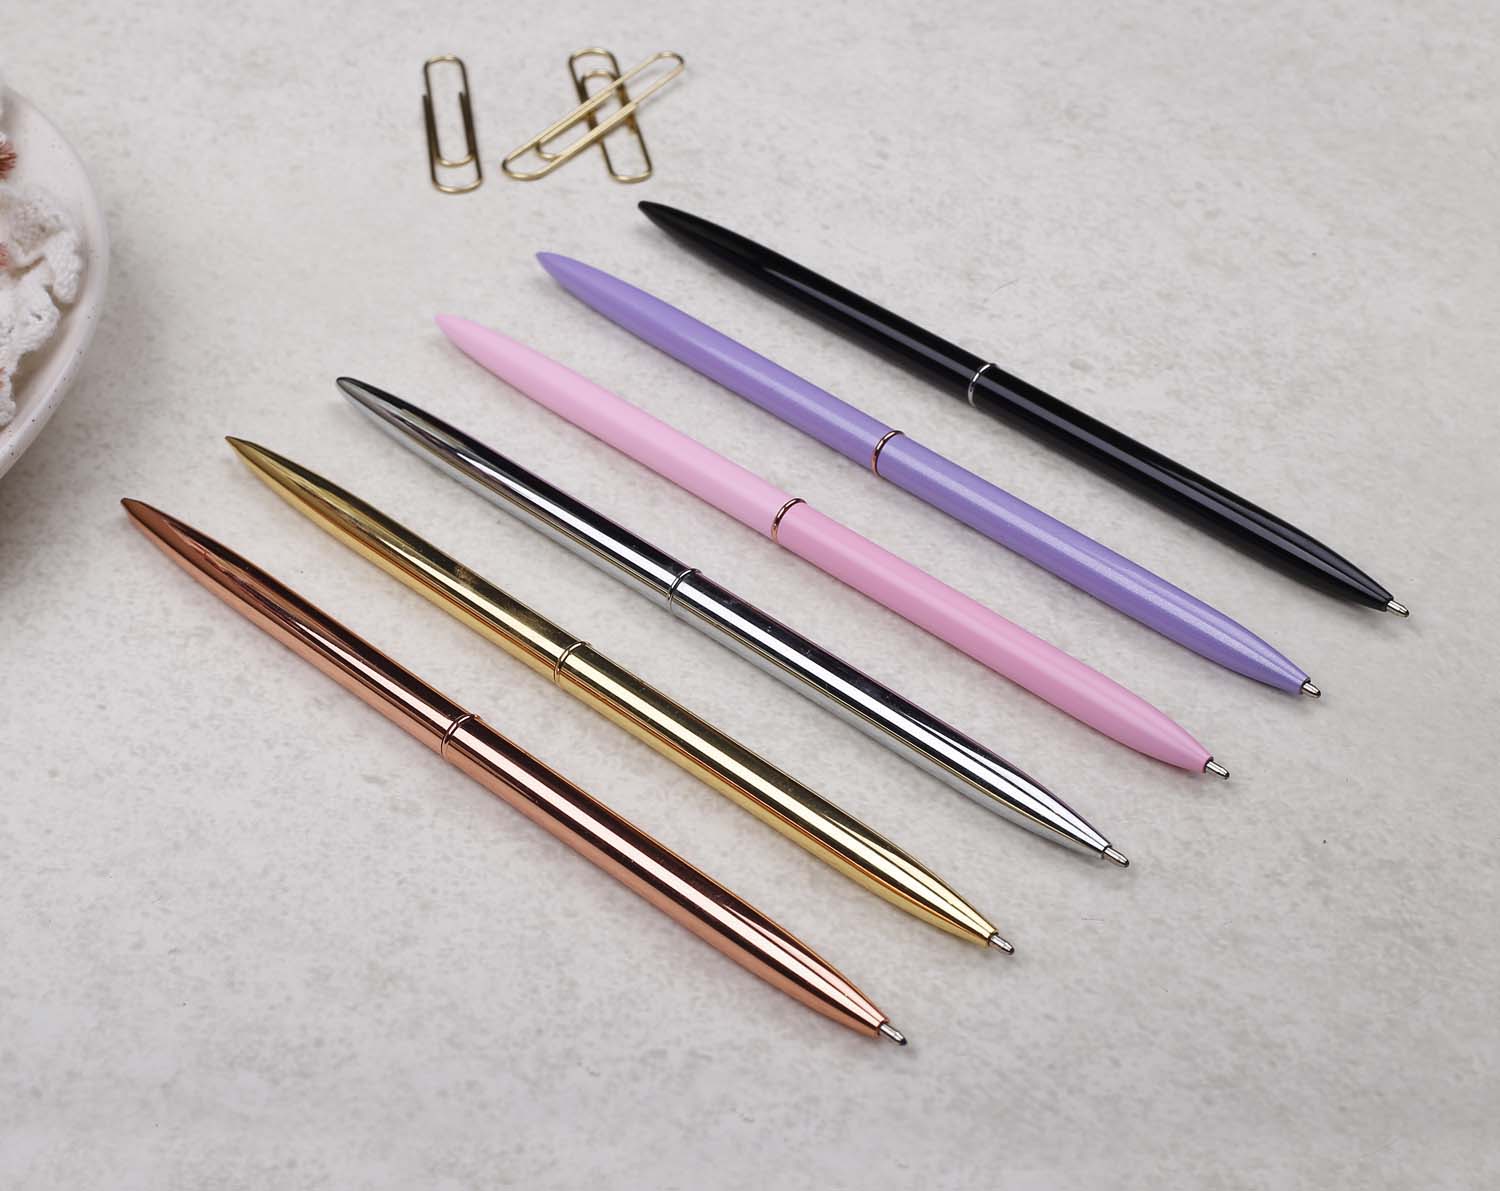 Slim lilac metal pen with ballpoint tip and rose gold detail.